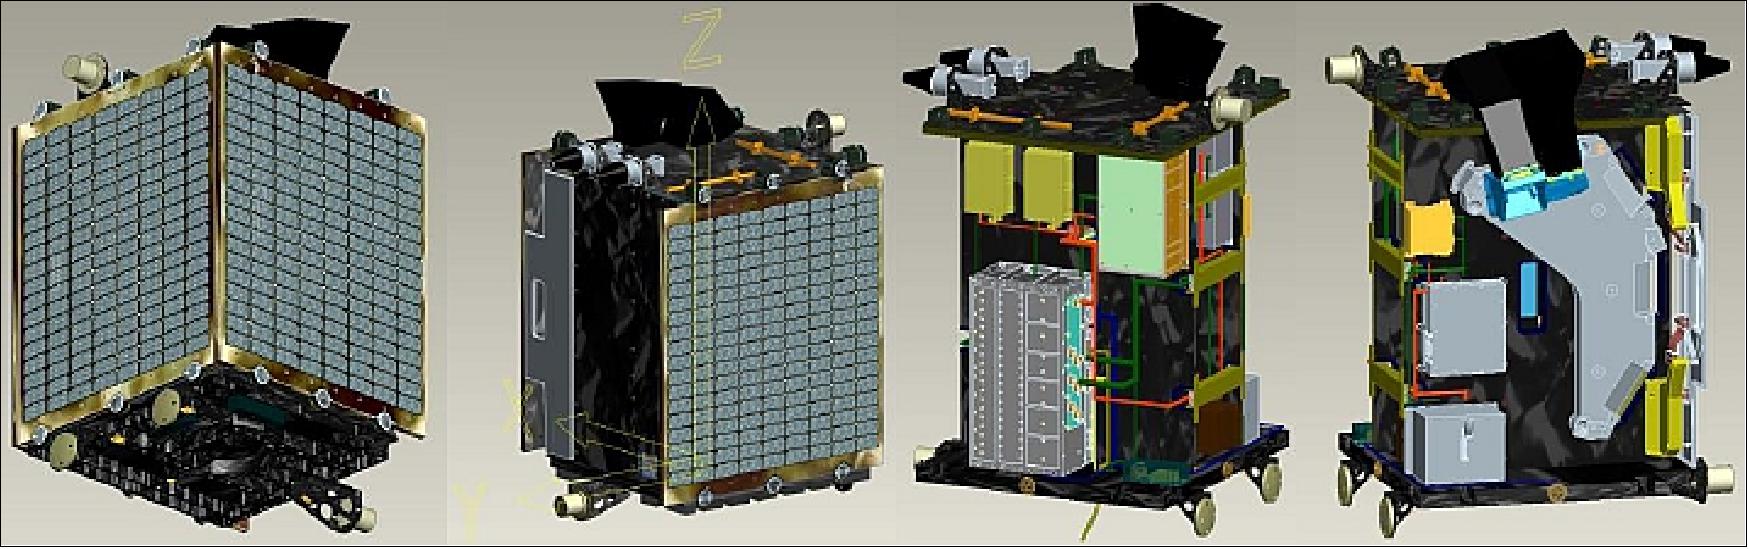 Figure 5: PROBA-V spacecraft accommodation, outer platform views on left, inner platform views on right (image credit: QinetiQ Space)